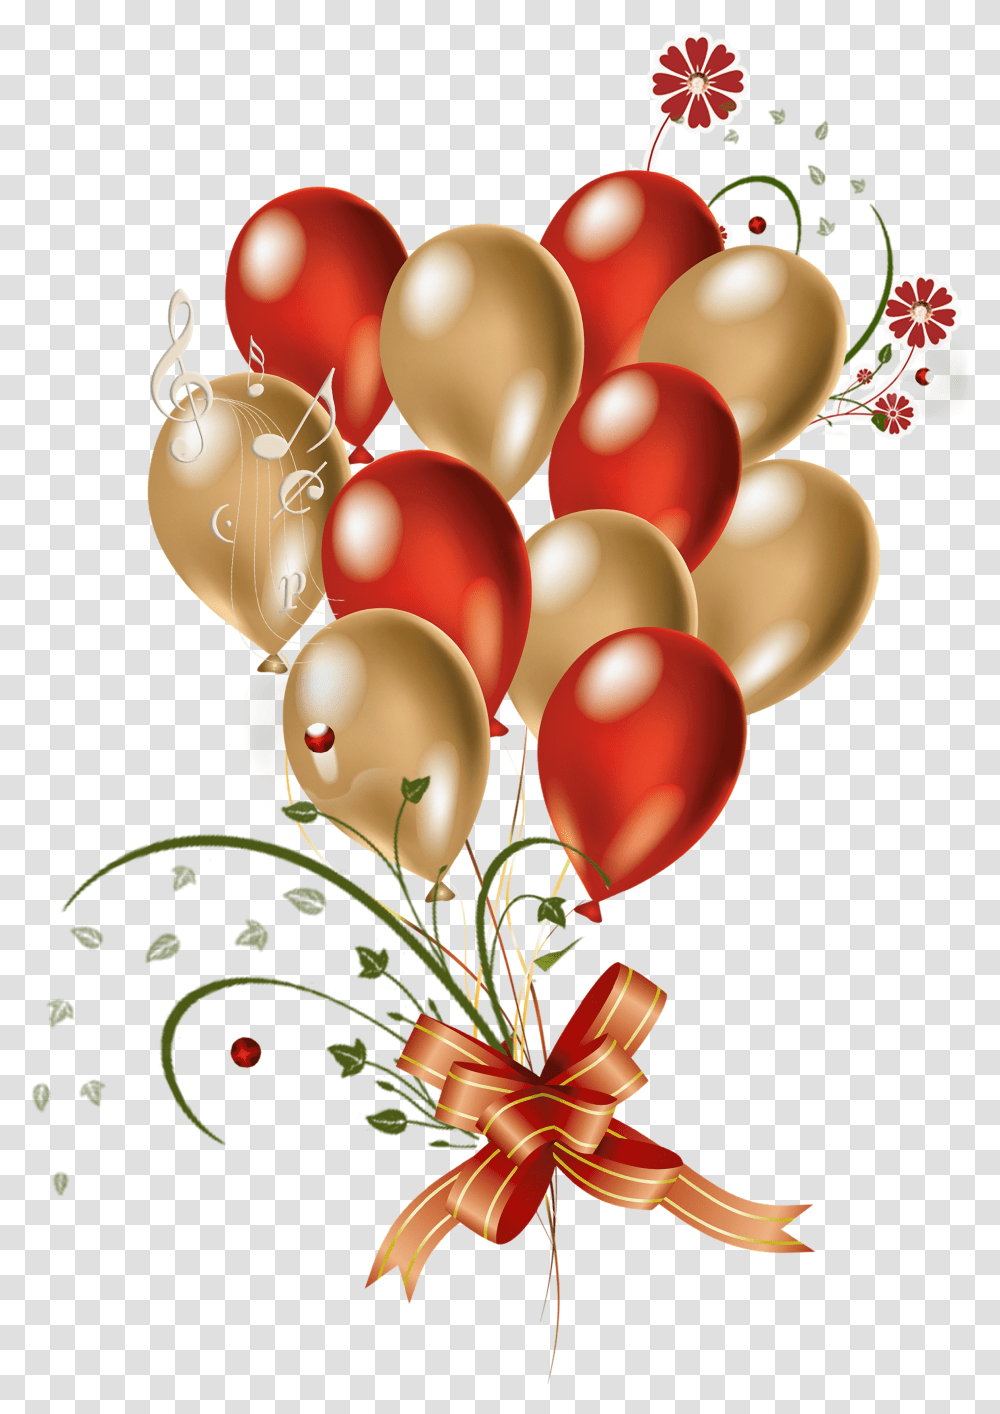 Fall Balloons Clip Art Happy Birthday Red And Gold Balloons Transparent Png